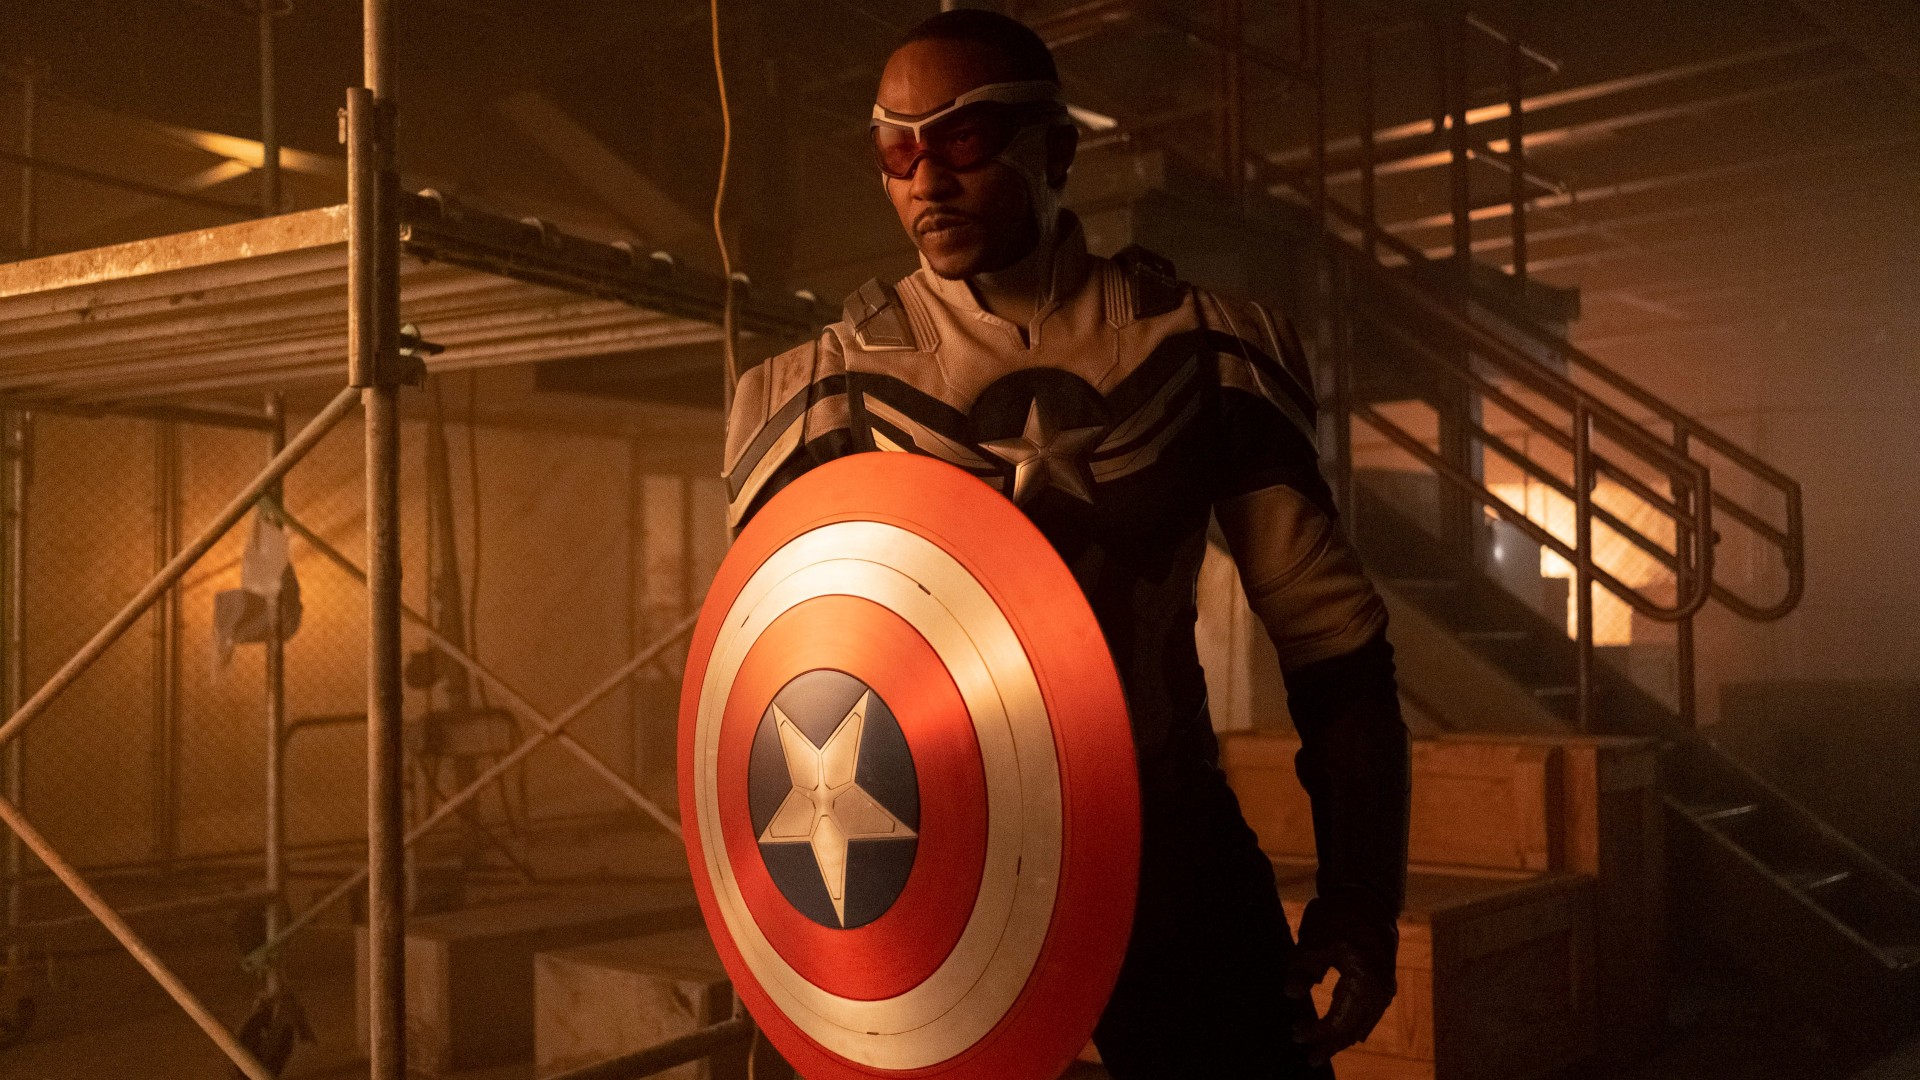 We have our first look at the new Falcon in Captain America 4 – thanks to a McDonald's advert